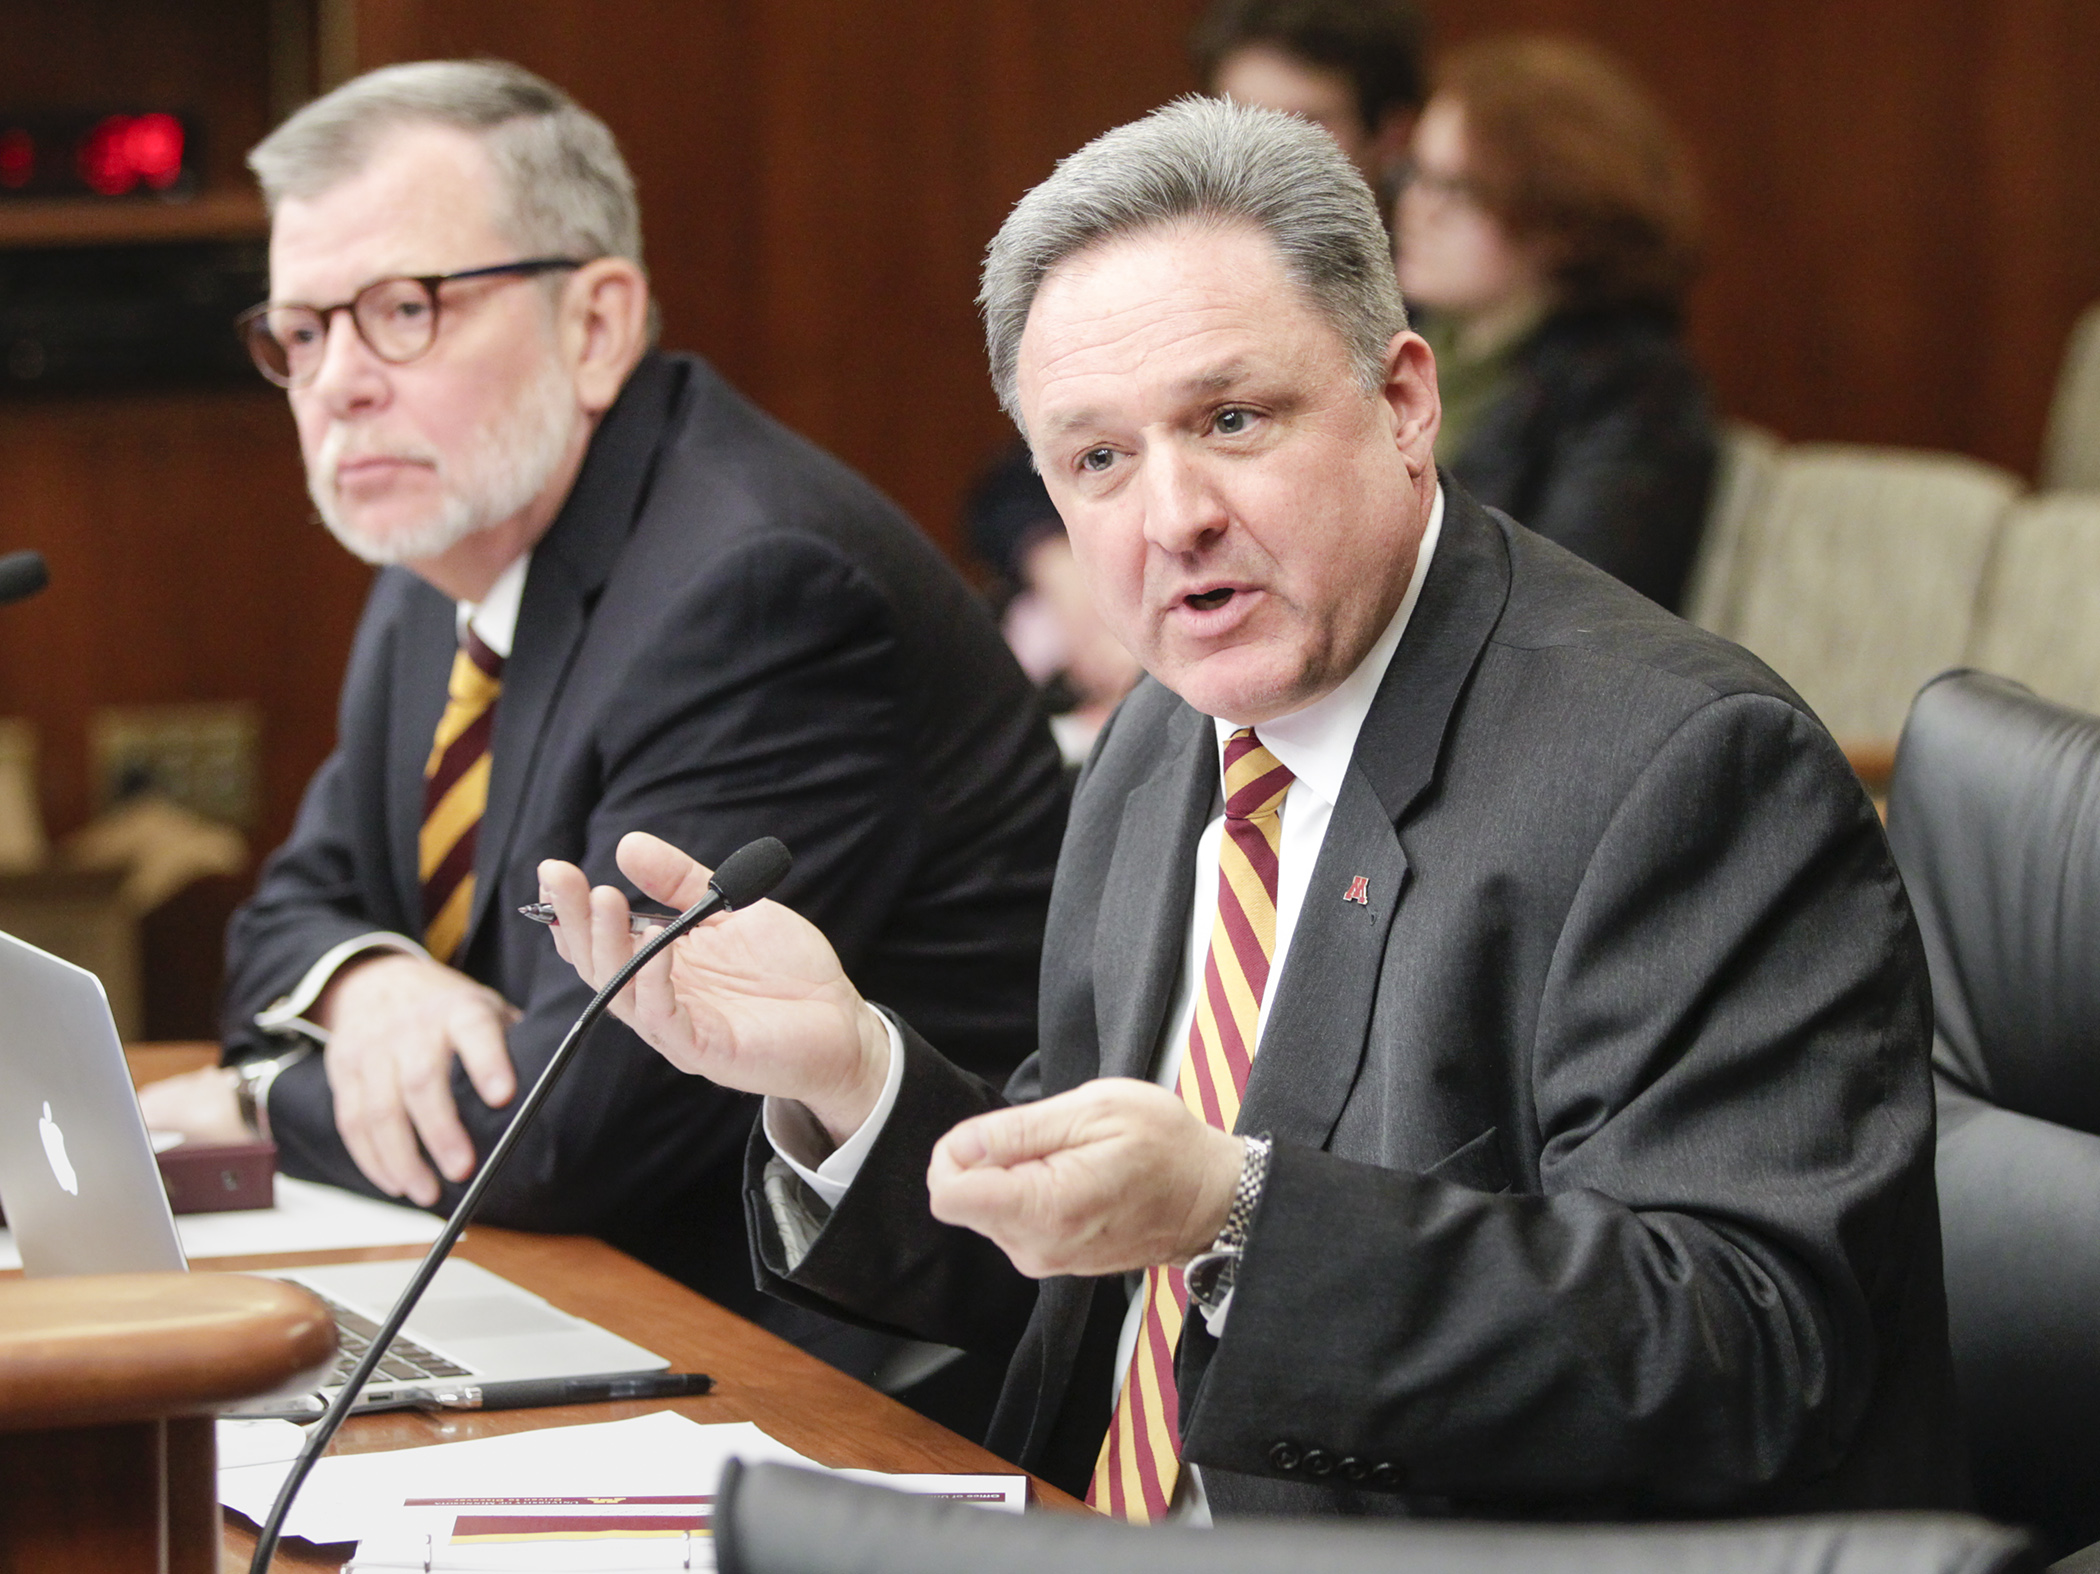 Brian Burnett, University of Minnesota senior vice president, testifies Feb. 12 in the House Higher Education Finance and Policy Division. Looking on is Eric Kaler, the university's president. Photo by Paul Battaglia